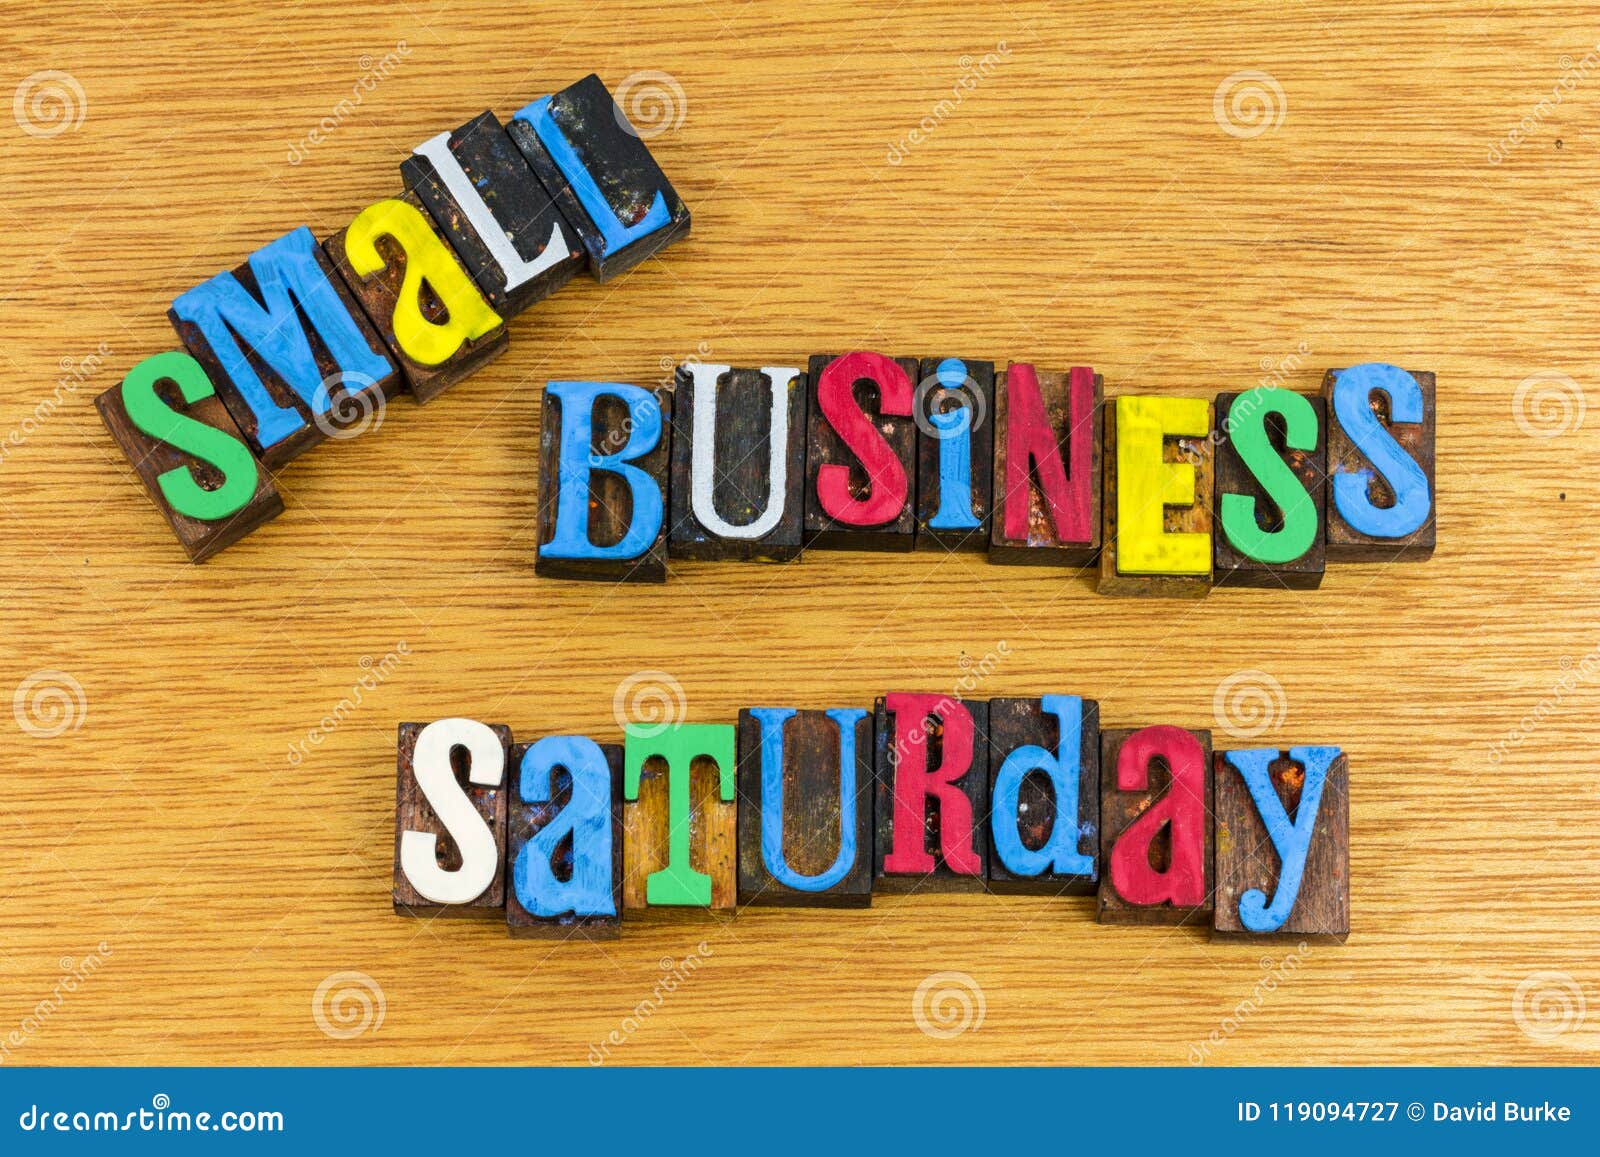 small retail business owner saturday sales sign local sale